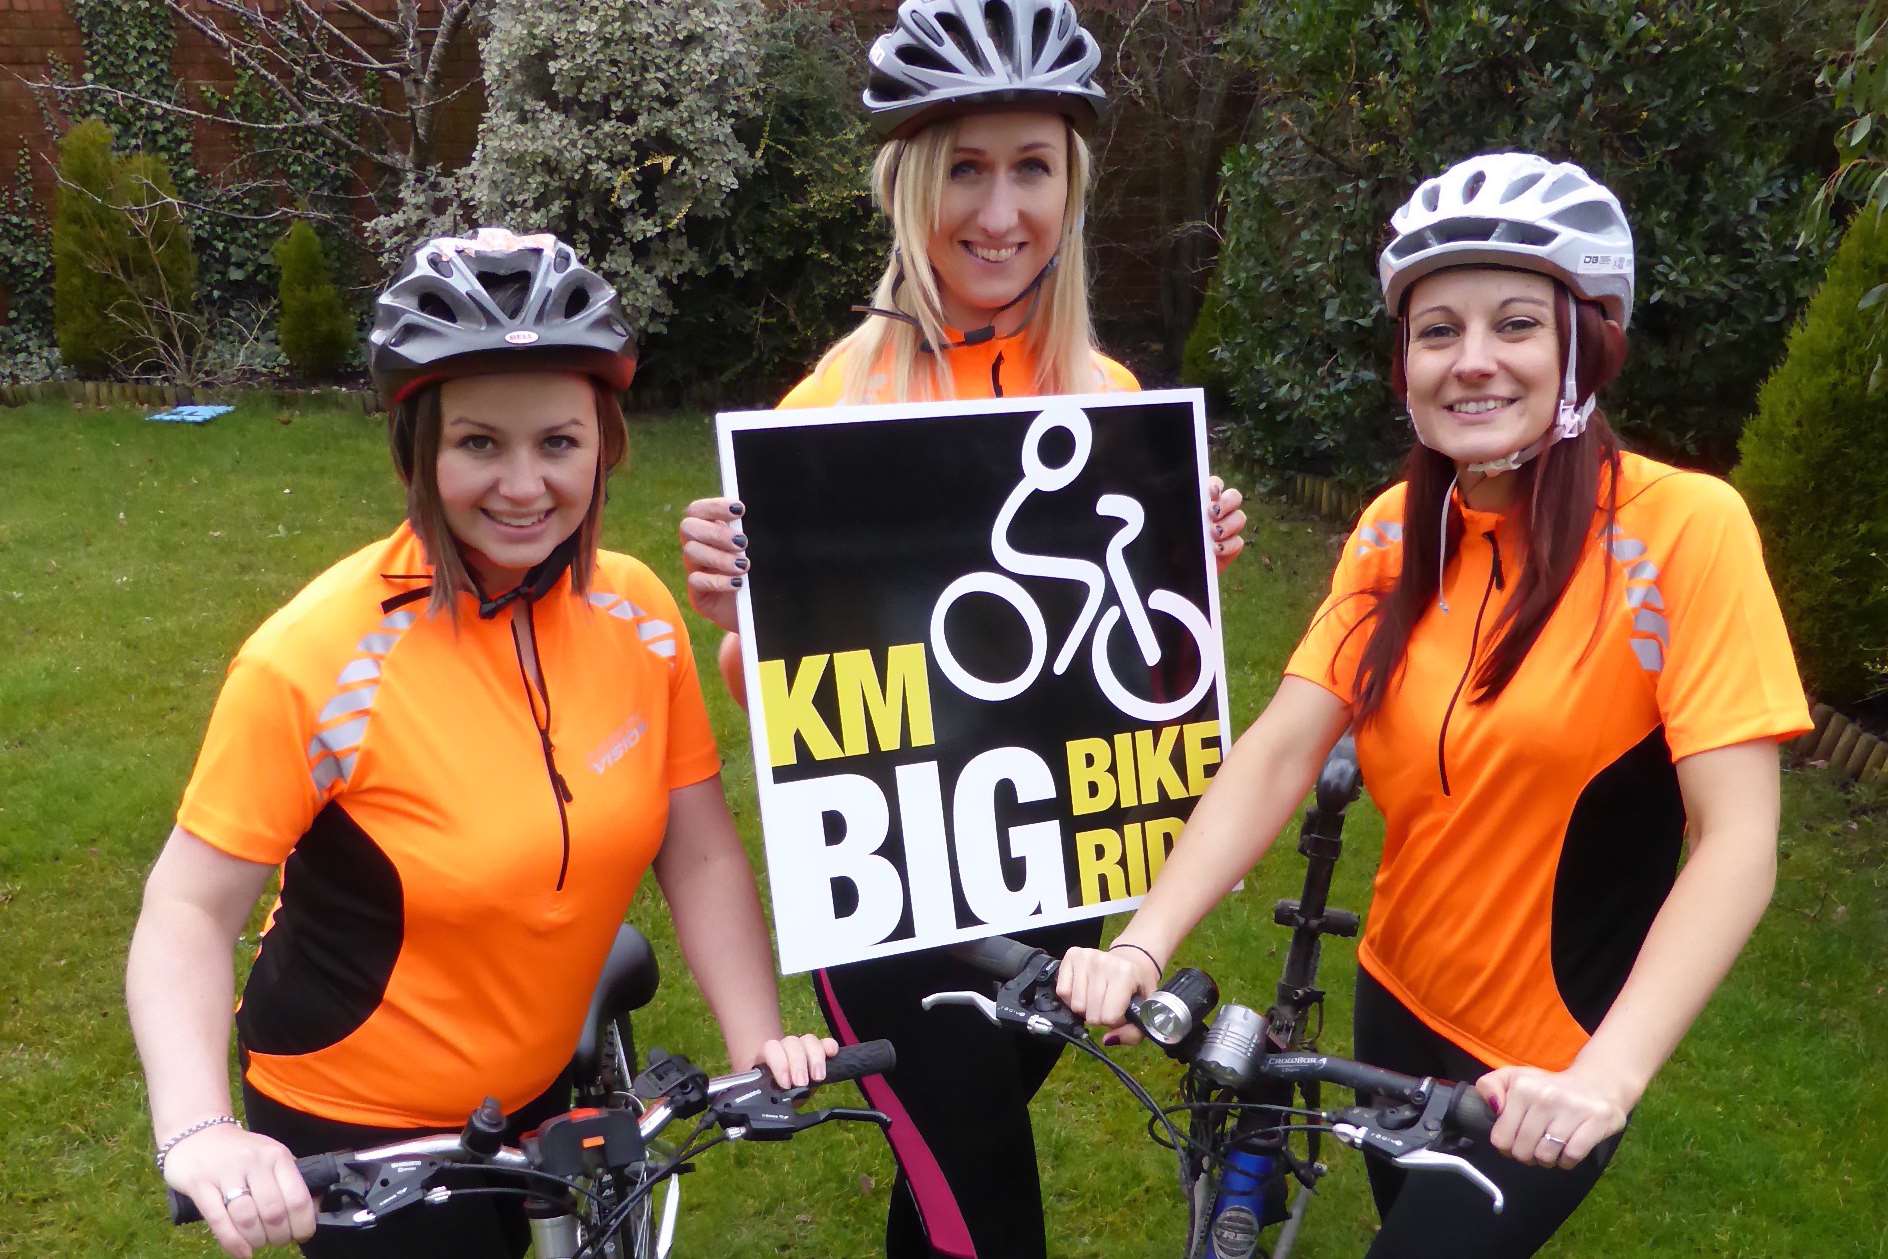 Alison Nightingale, business development manager, Johanna Hillman, education consultant, and Amy Woods, primary education consultant, all of Three R's Teacher Recruitment, are saddling up for the KM Big Bike Ride on Sunday, April 26.